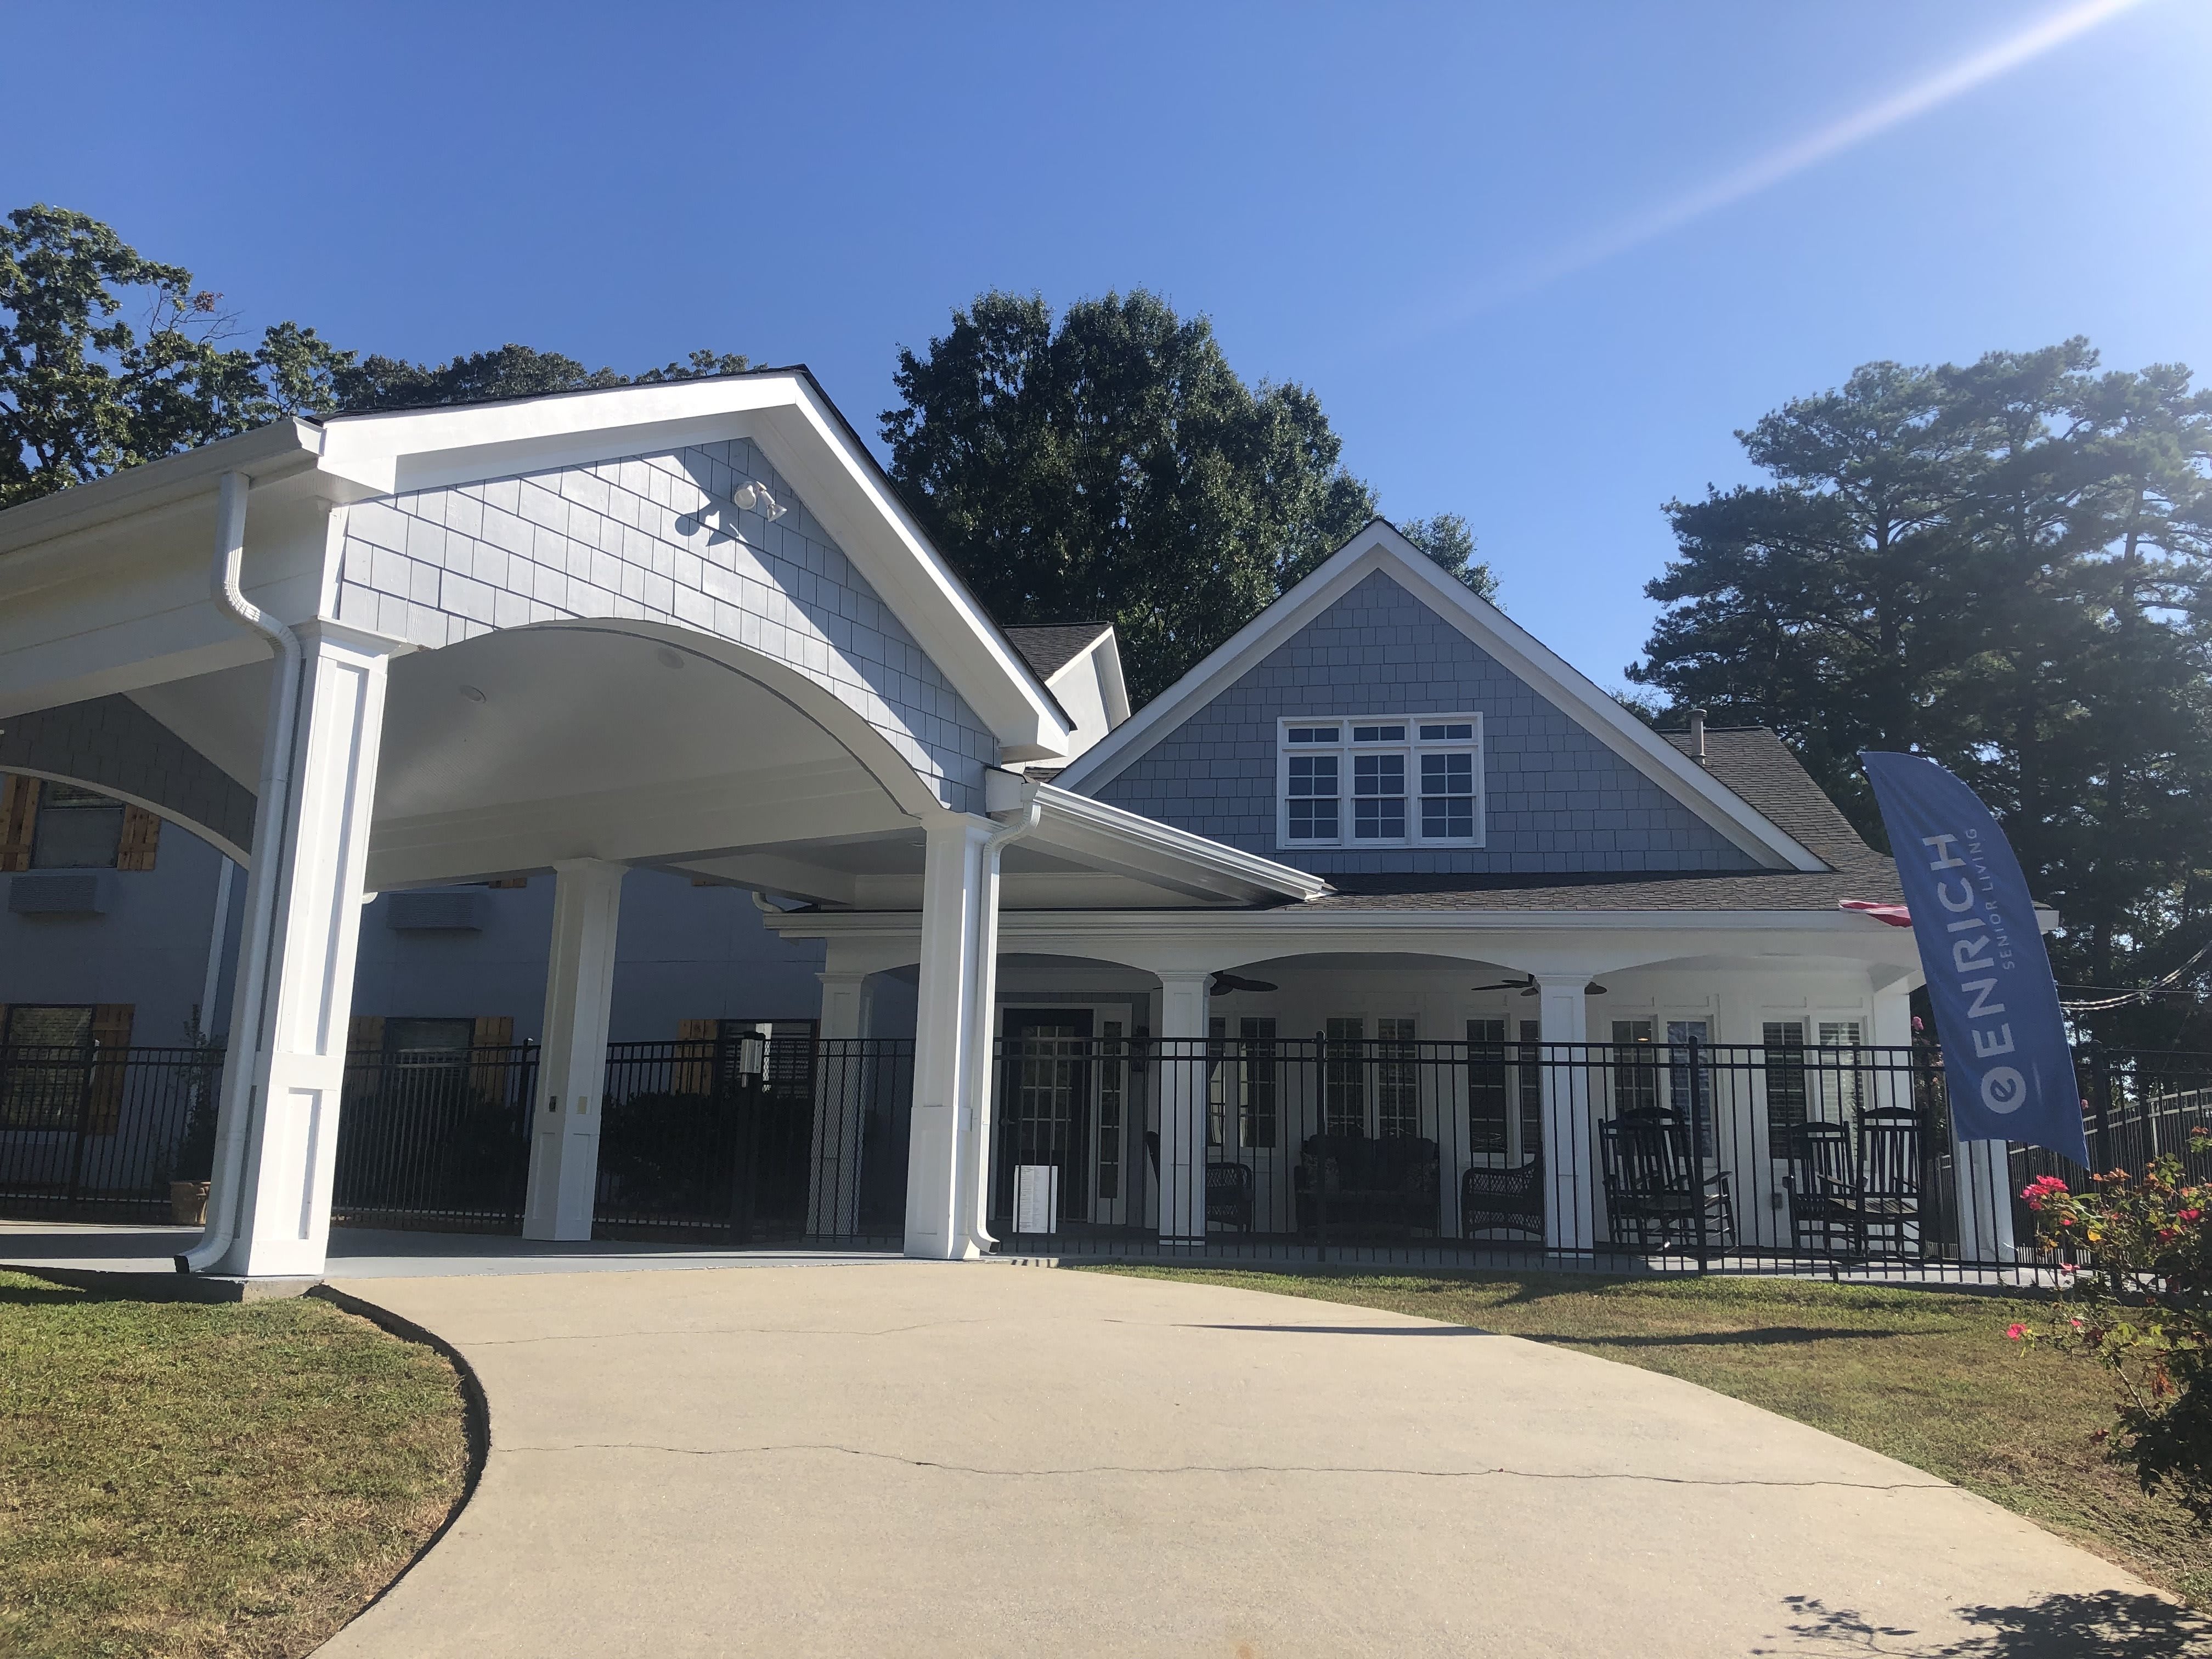 Enrich at 519 | Assisted Living | Norcross, GA 30071 | 12 reviews